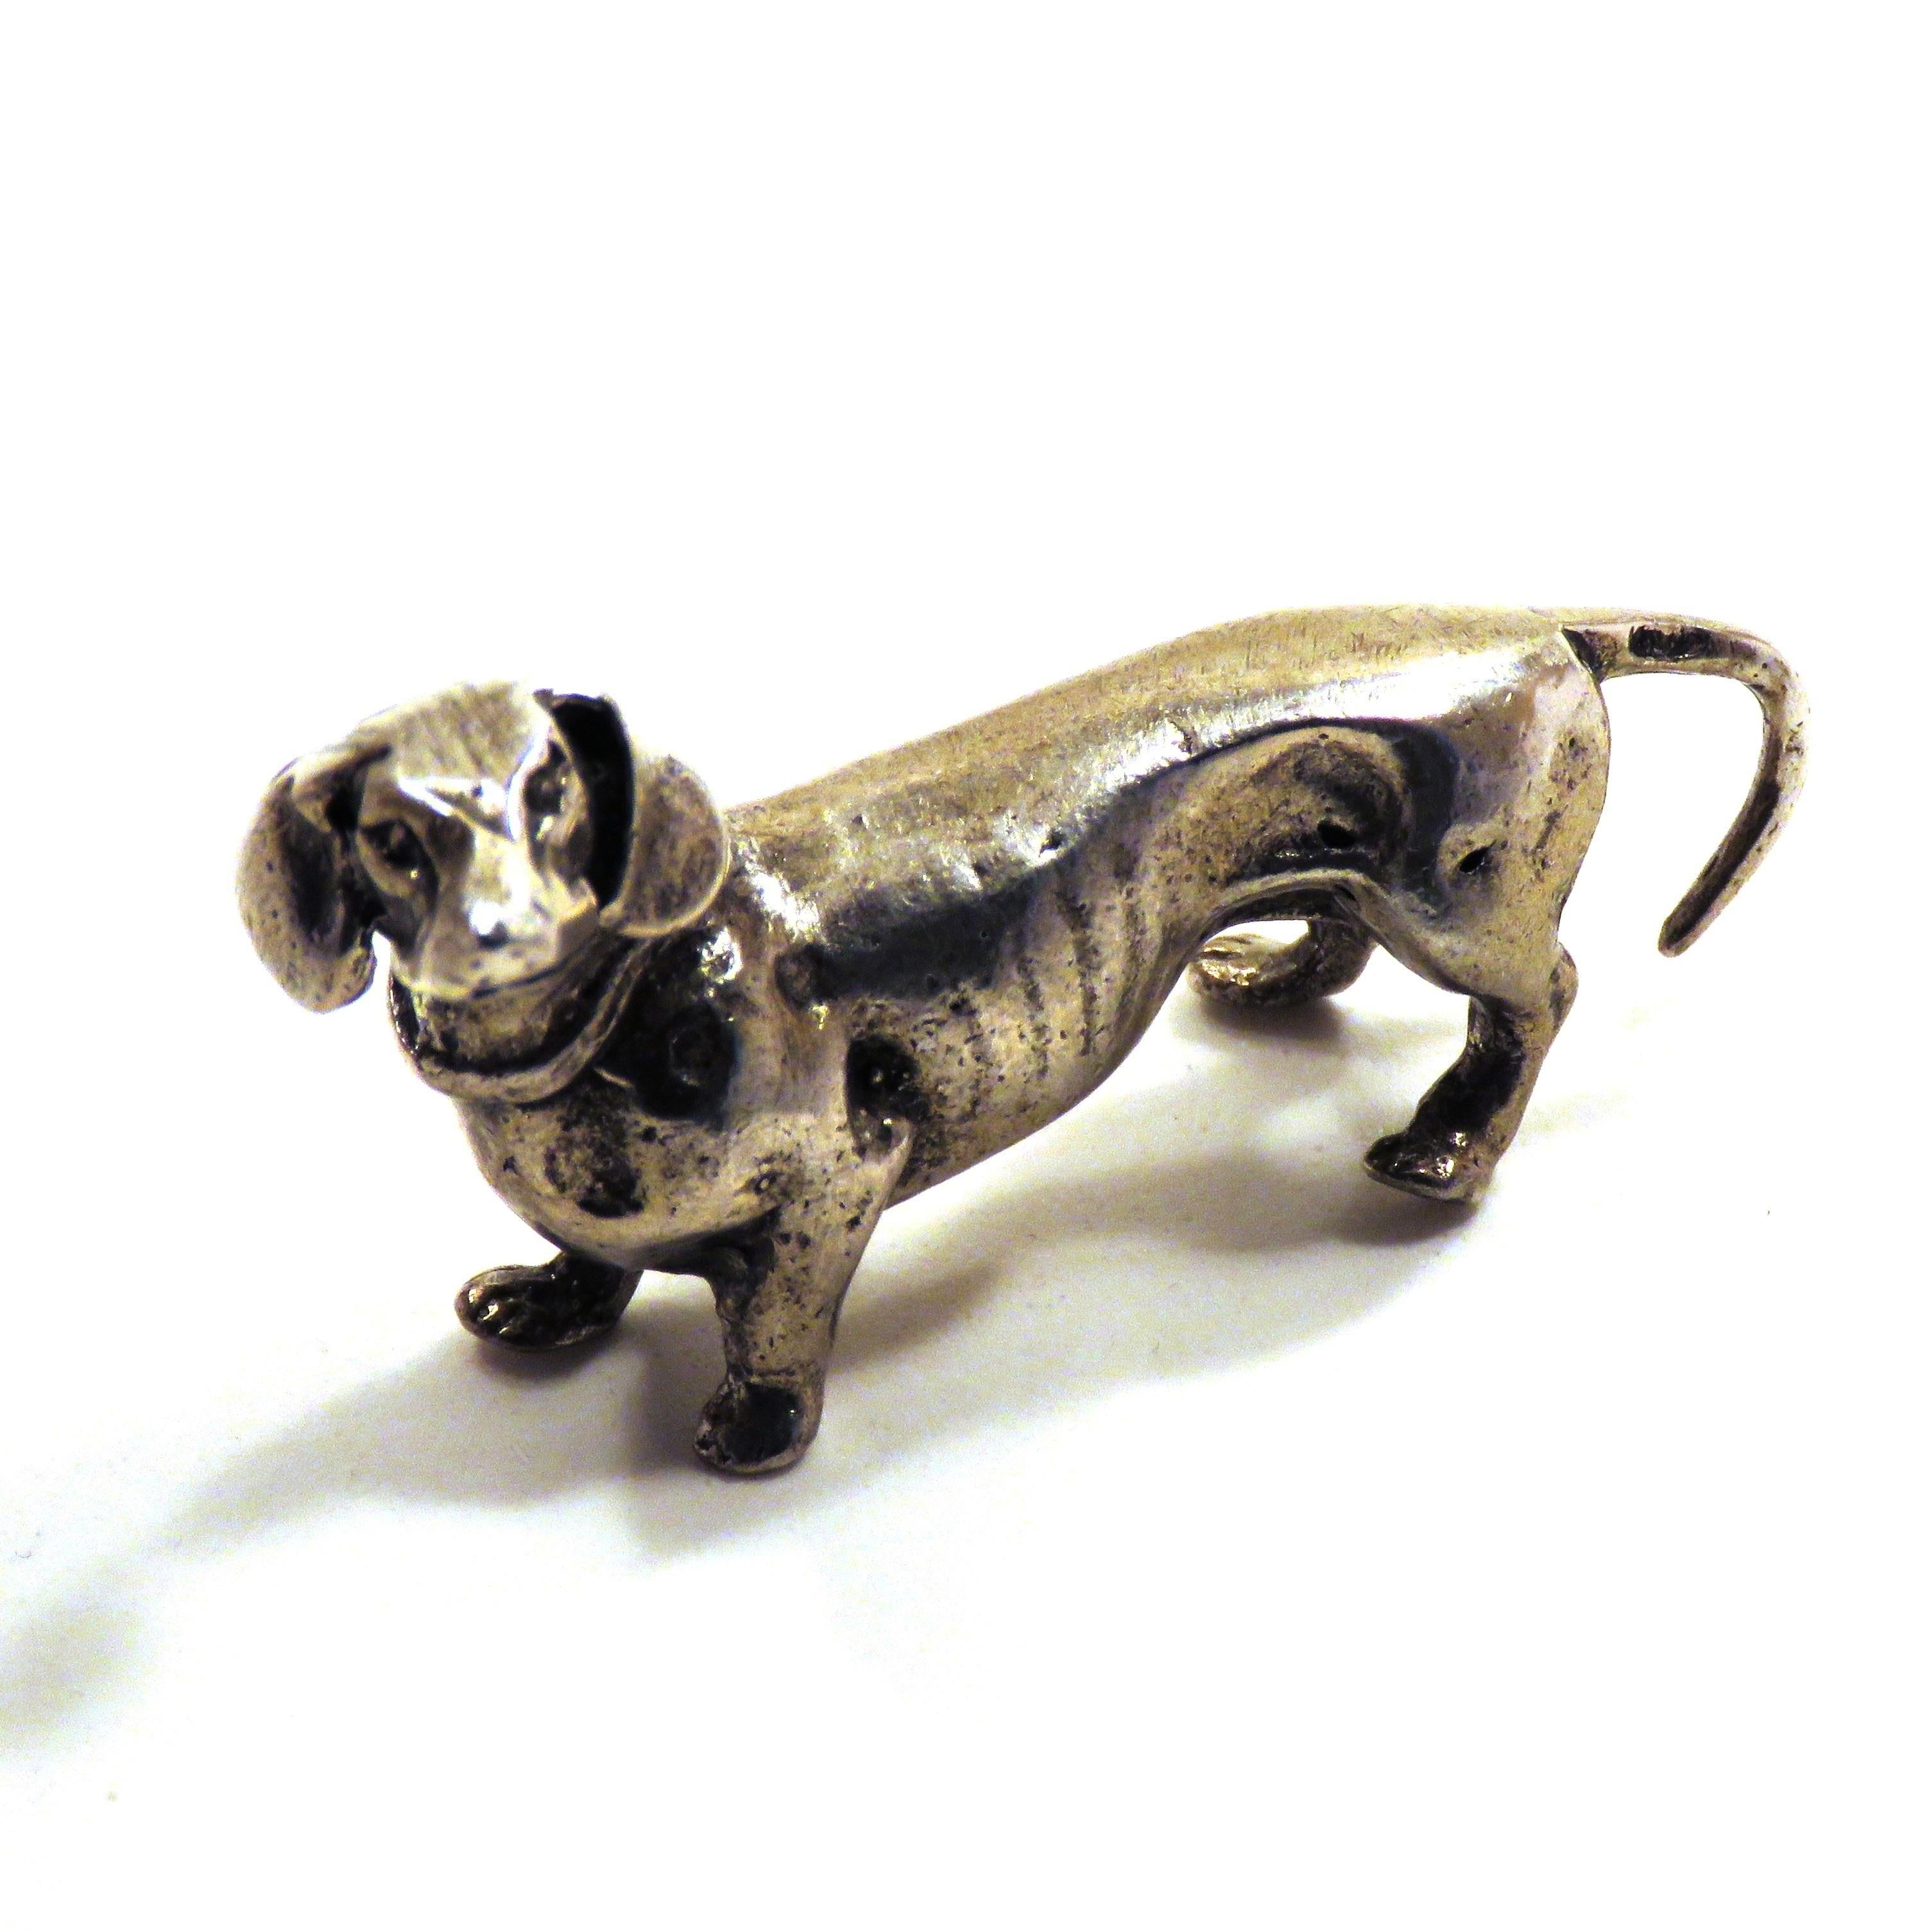 Solid silver dachshund very good vintage condition.
Dimensions: Height 29 mm / 1.141 inches - Length 52 mm / 2.047 inches - Weight 42 grams.
It  is stamped with the Silver Italian Mark 800 - Made in